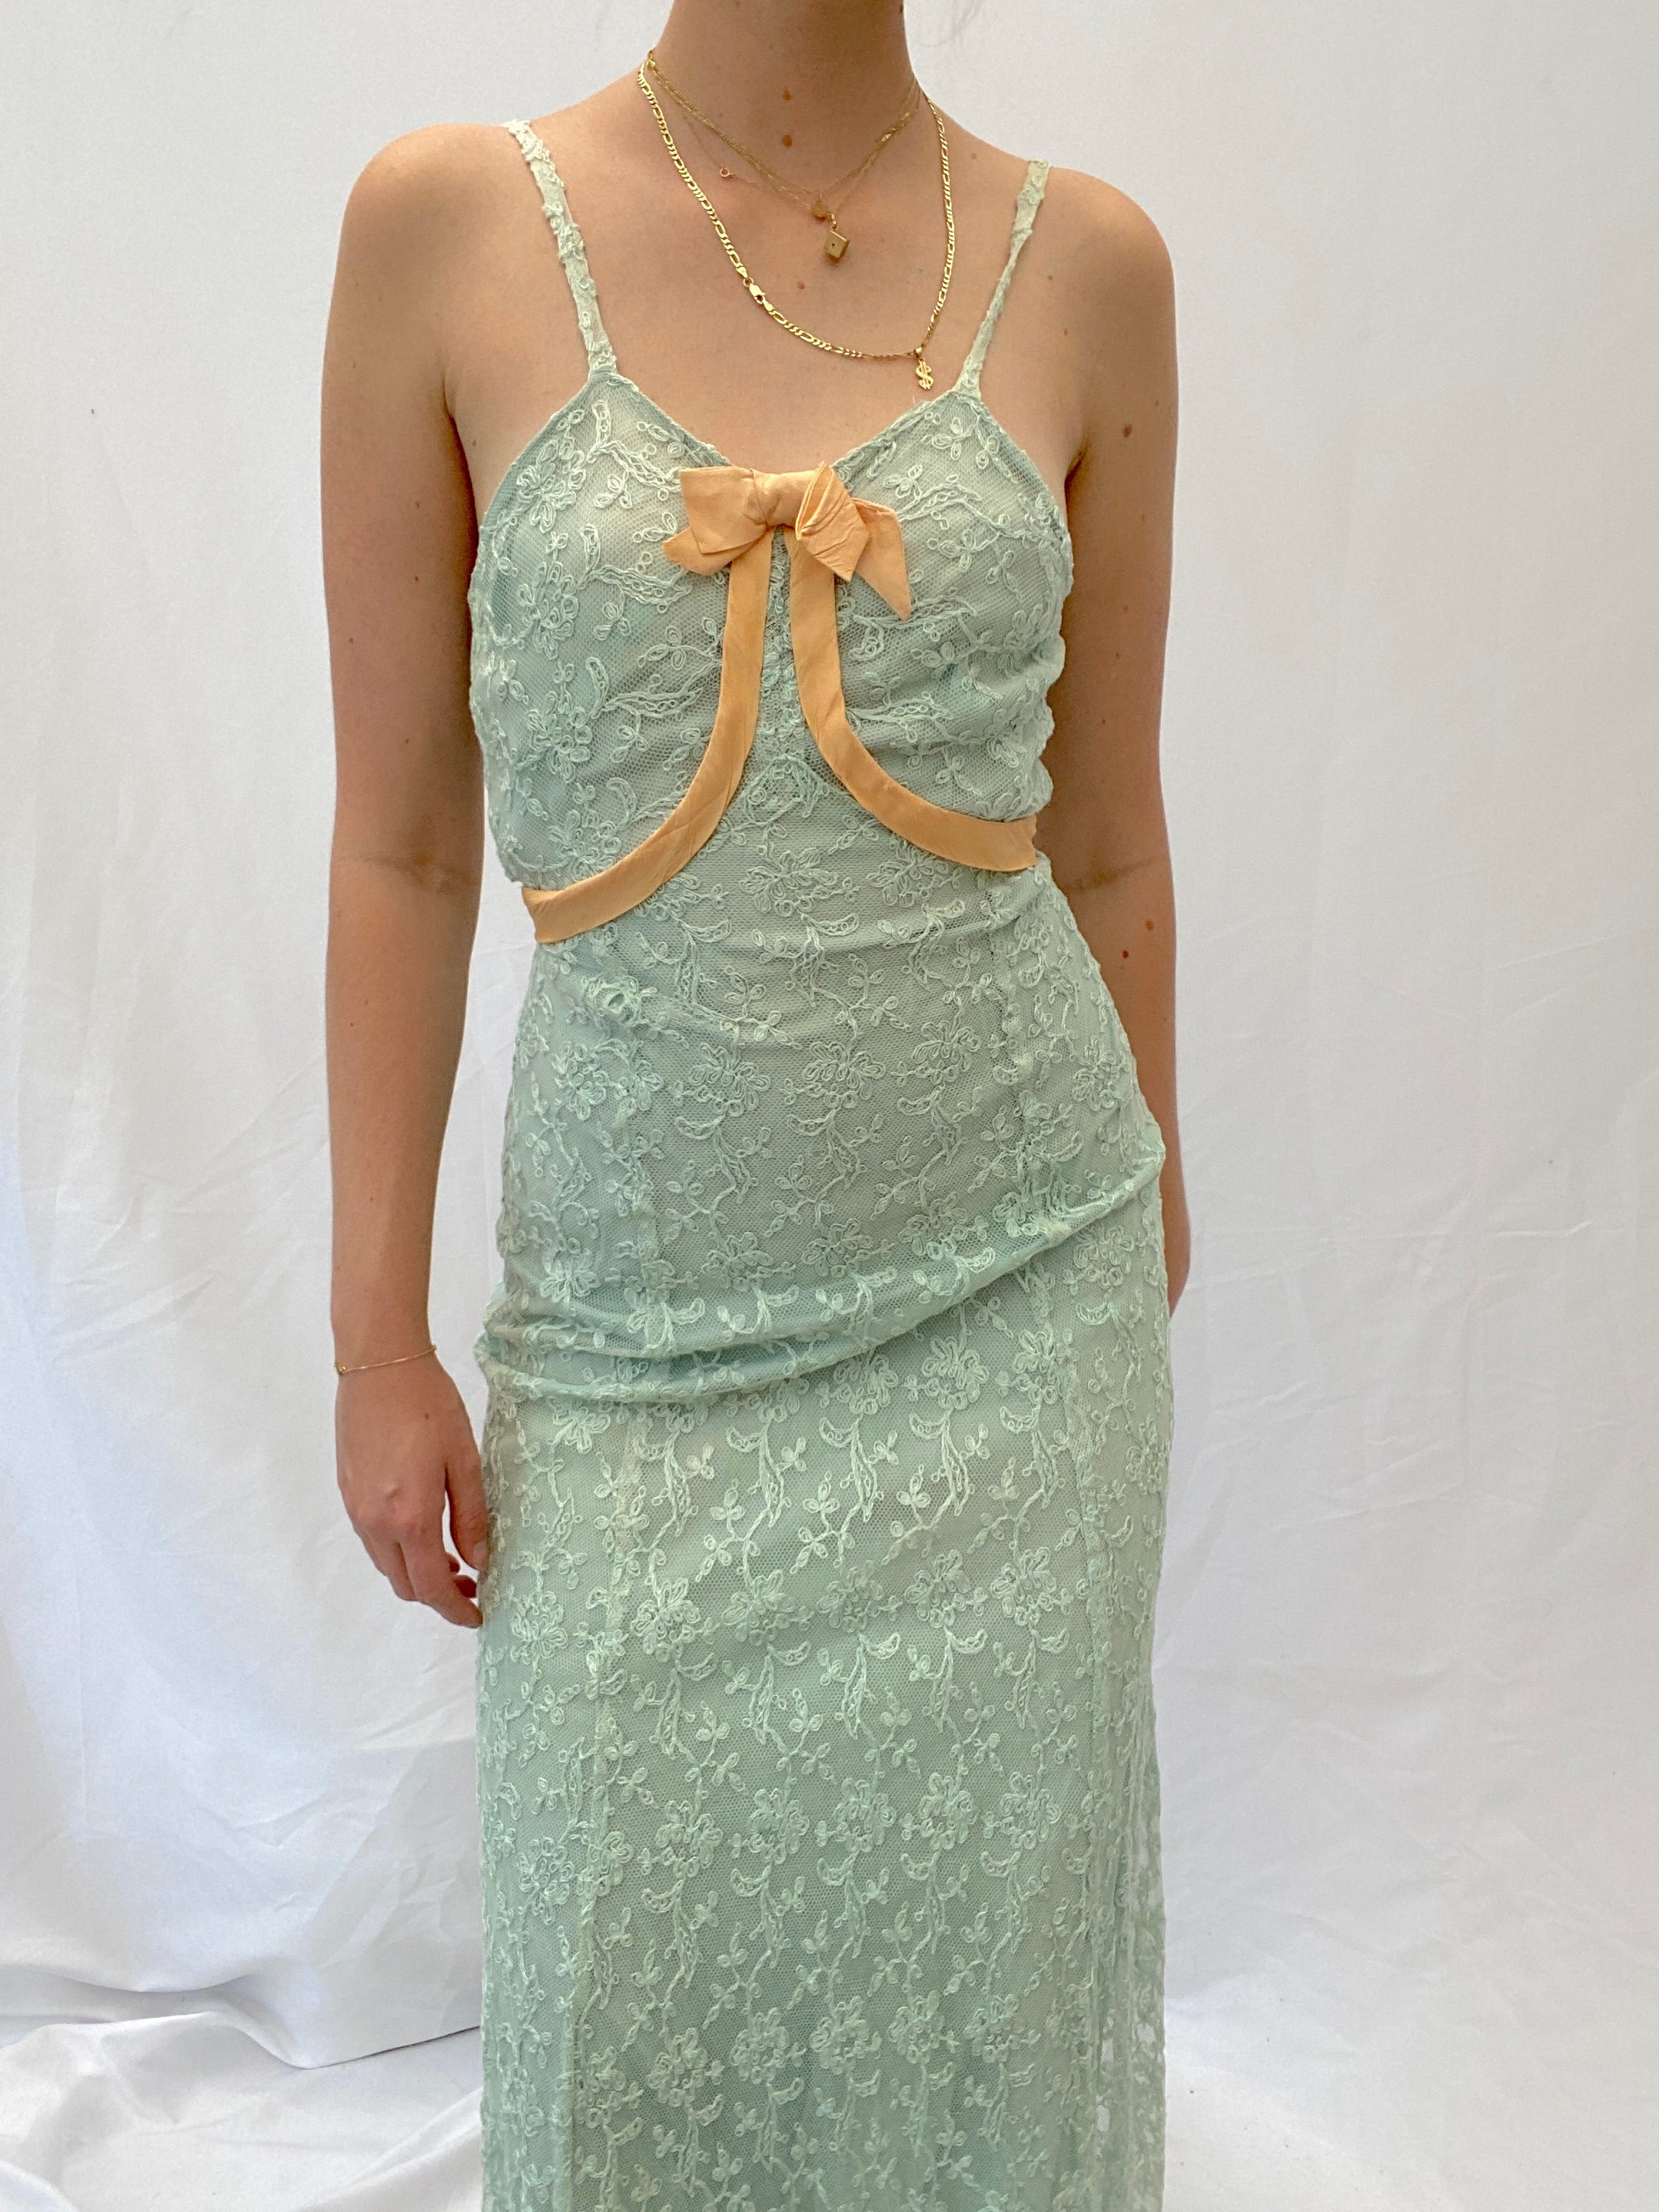 1940's Ocean Blue Lace Dress with Pink Satin Tie